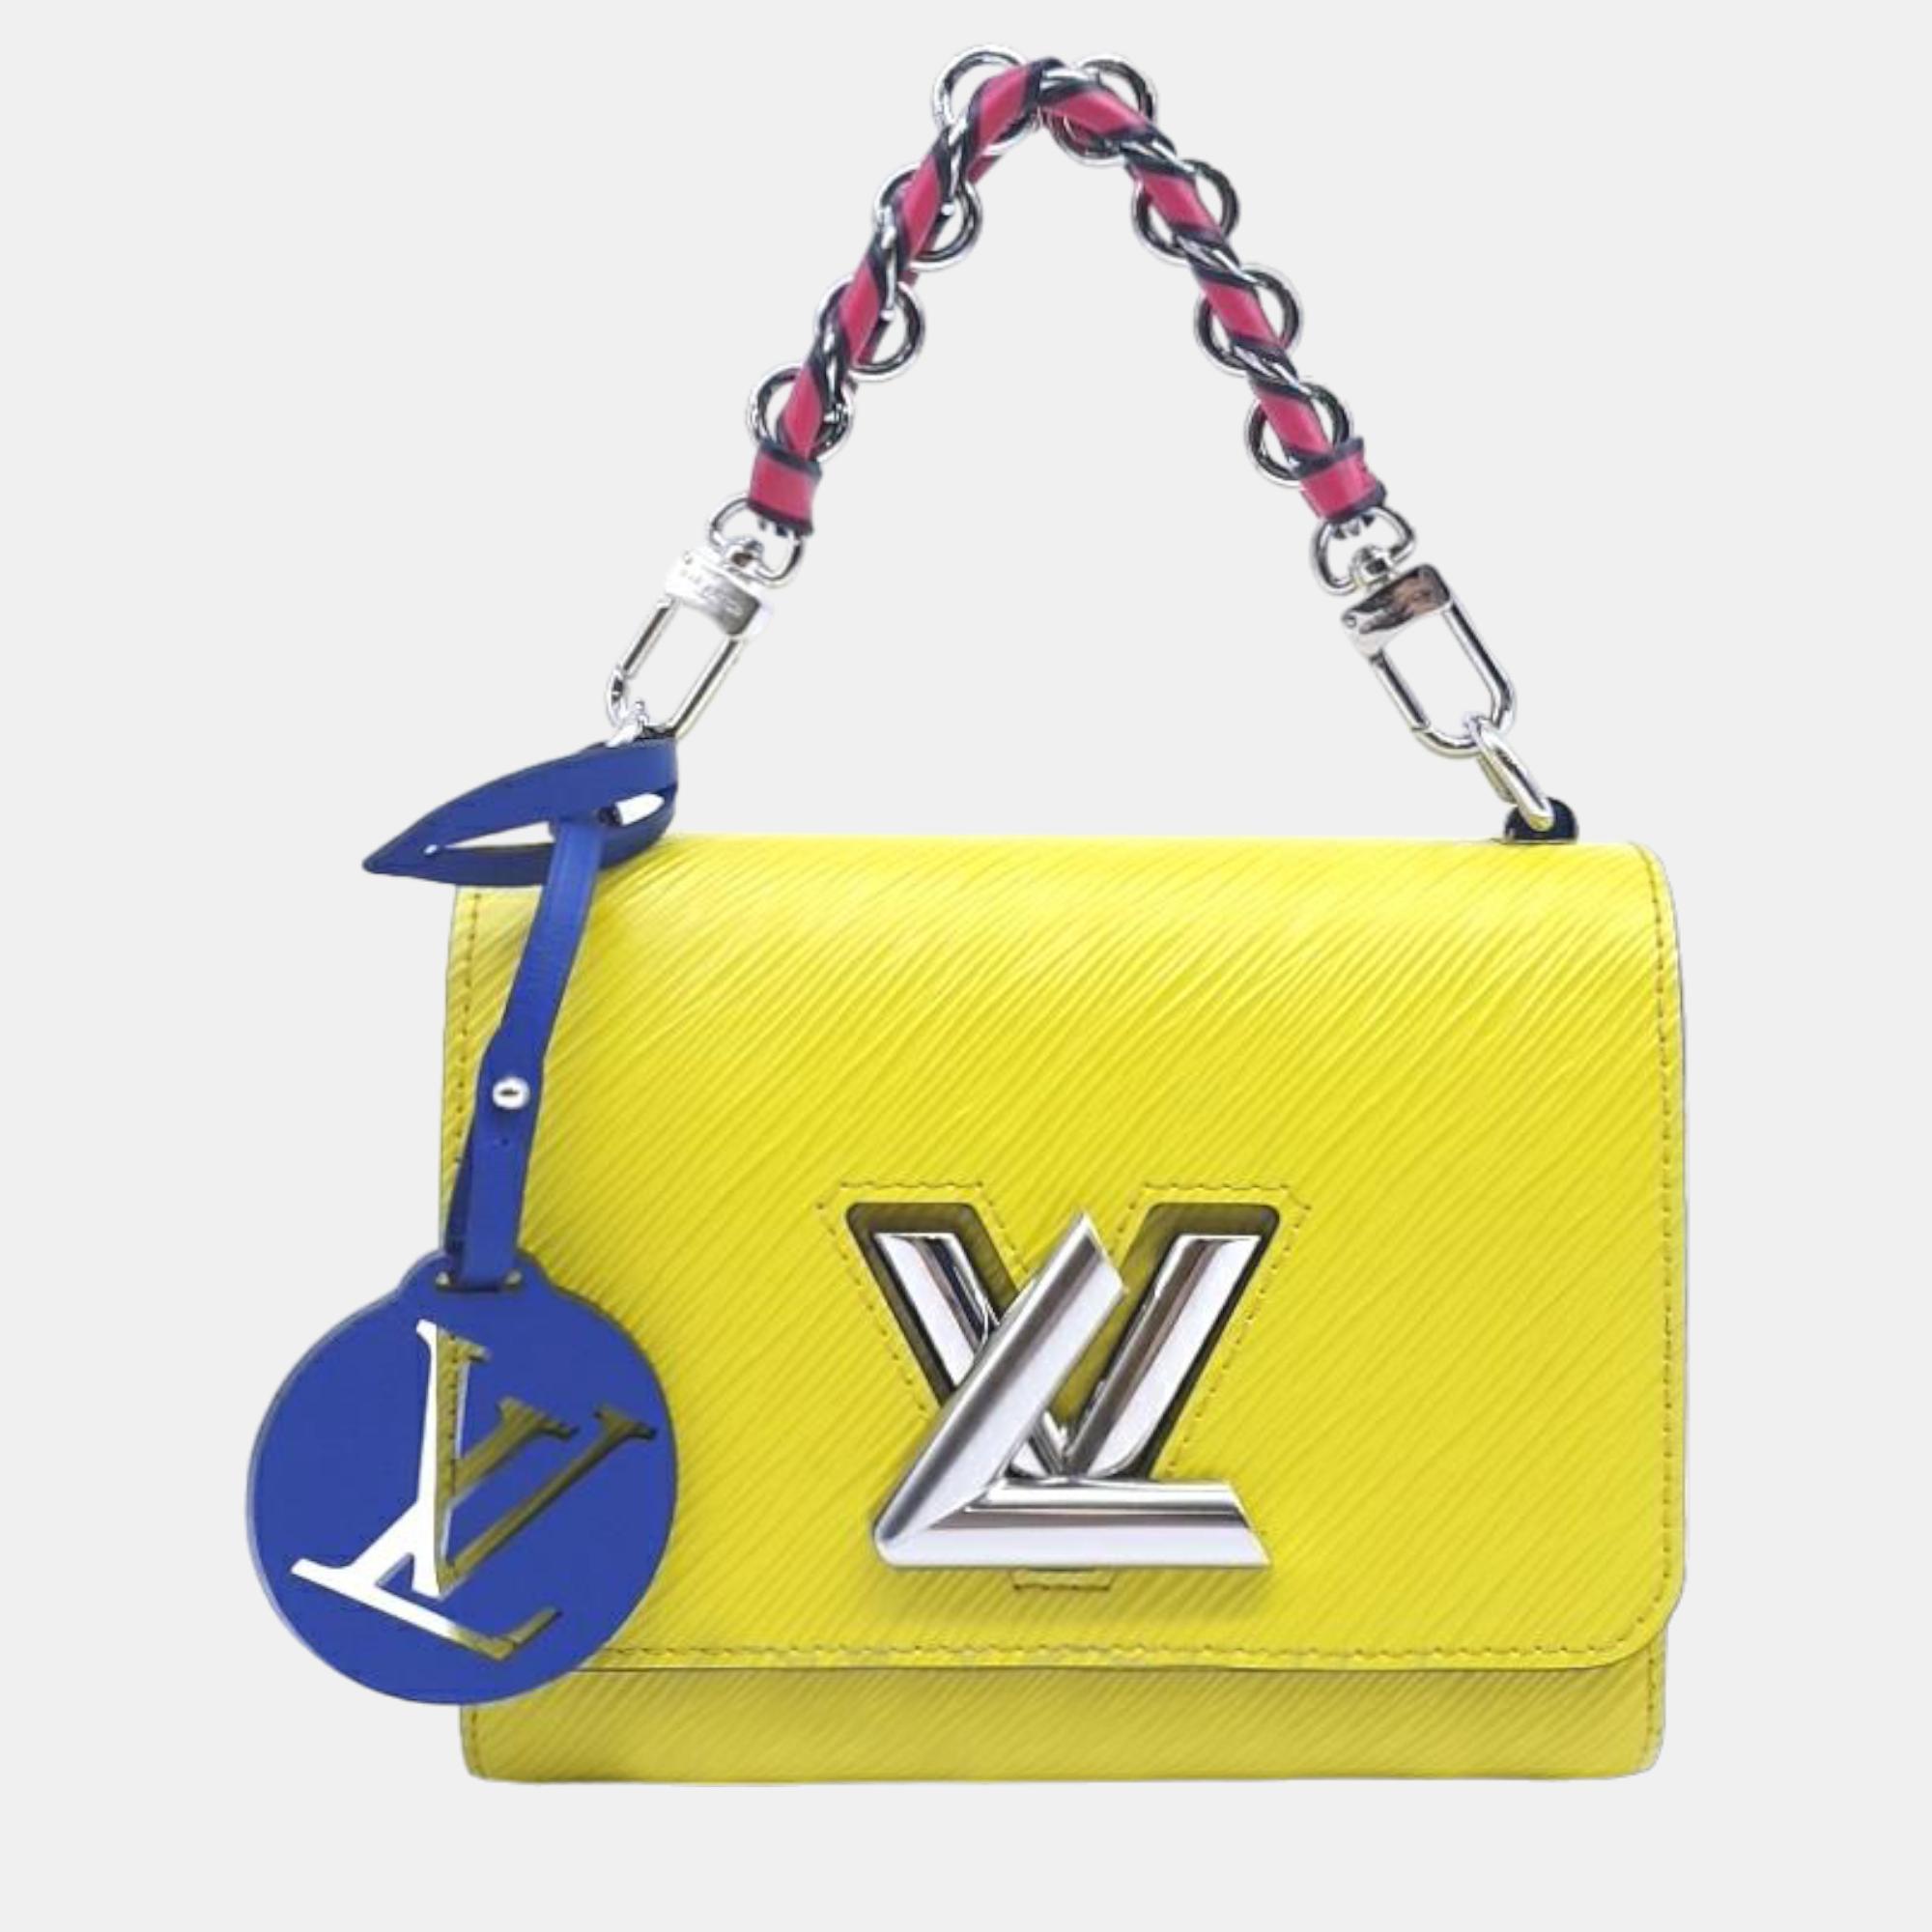 Pre-owned Louis Vuitton Epi Twist Pm In Yellow